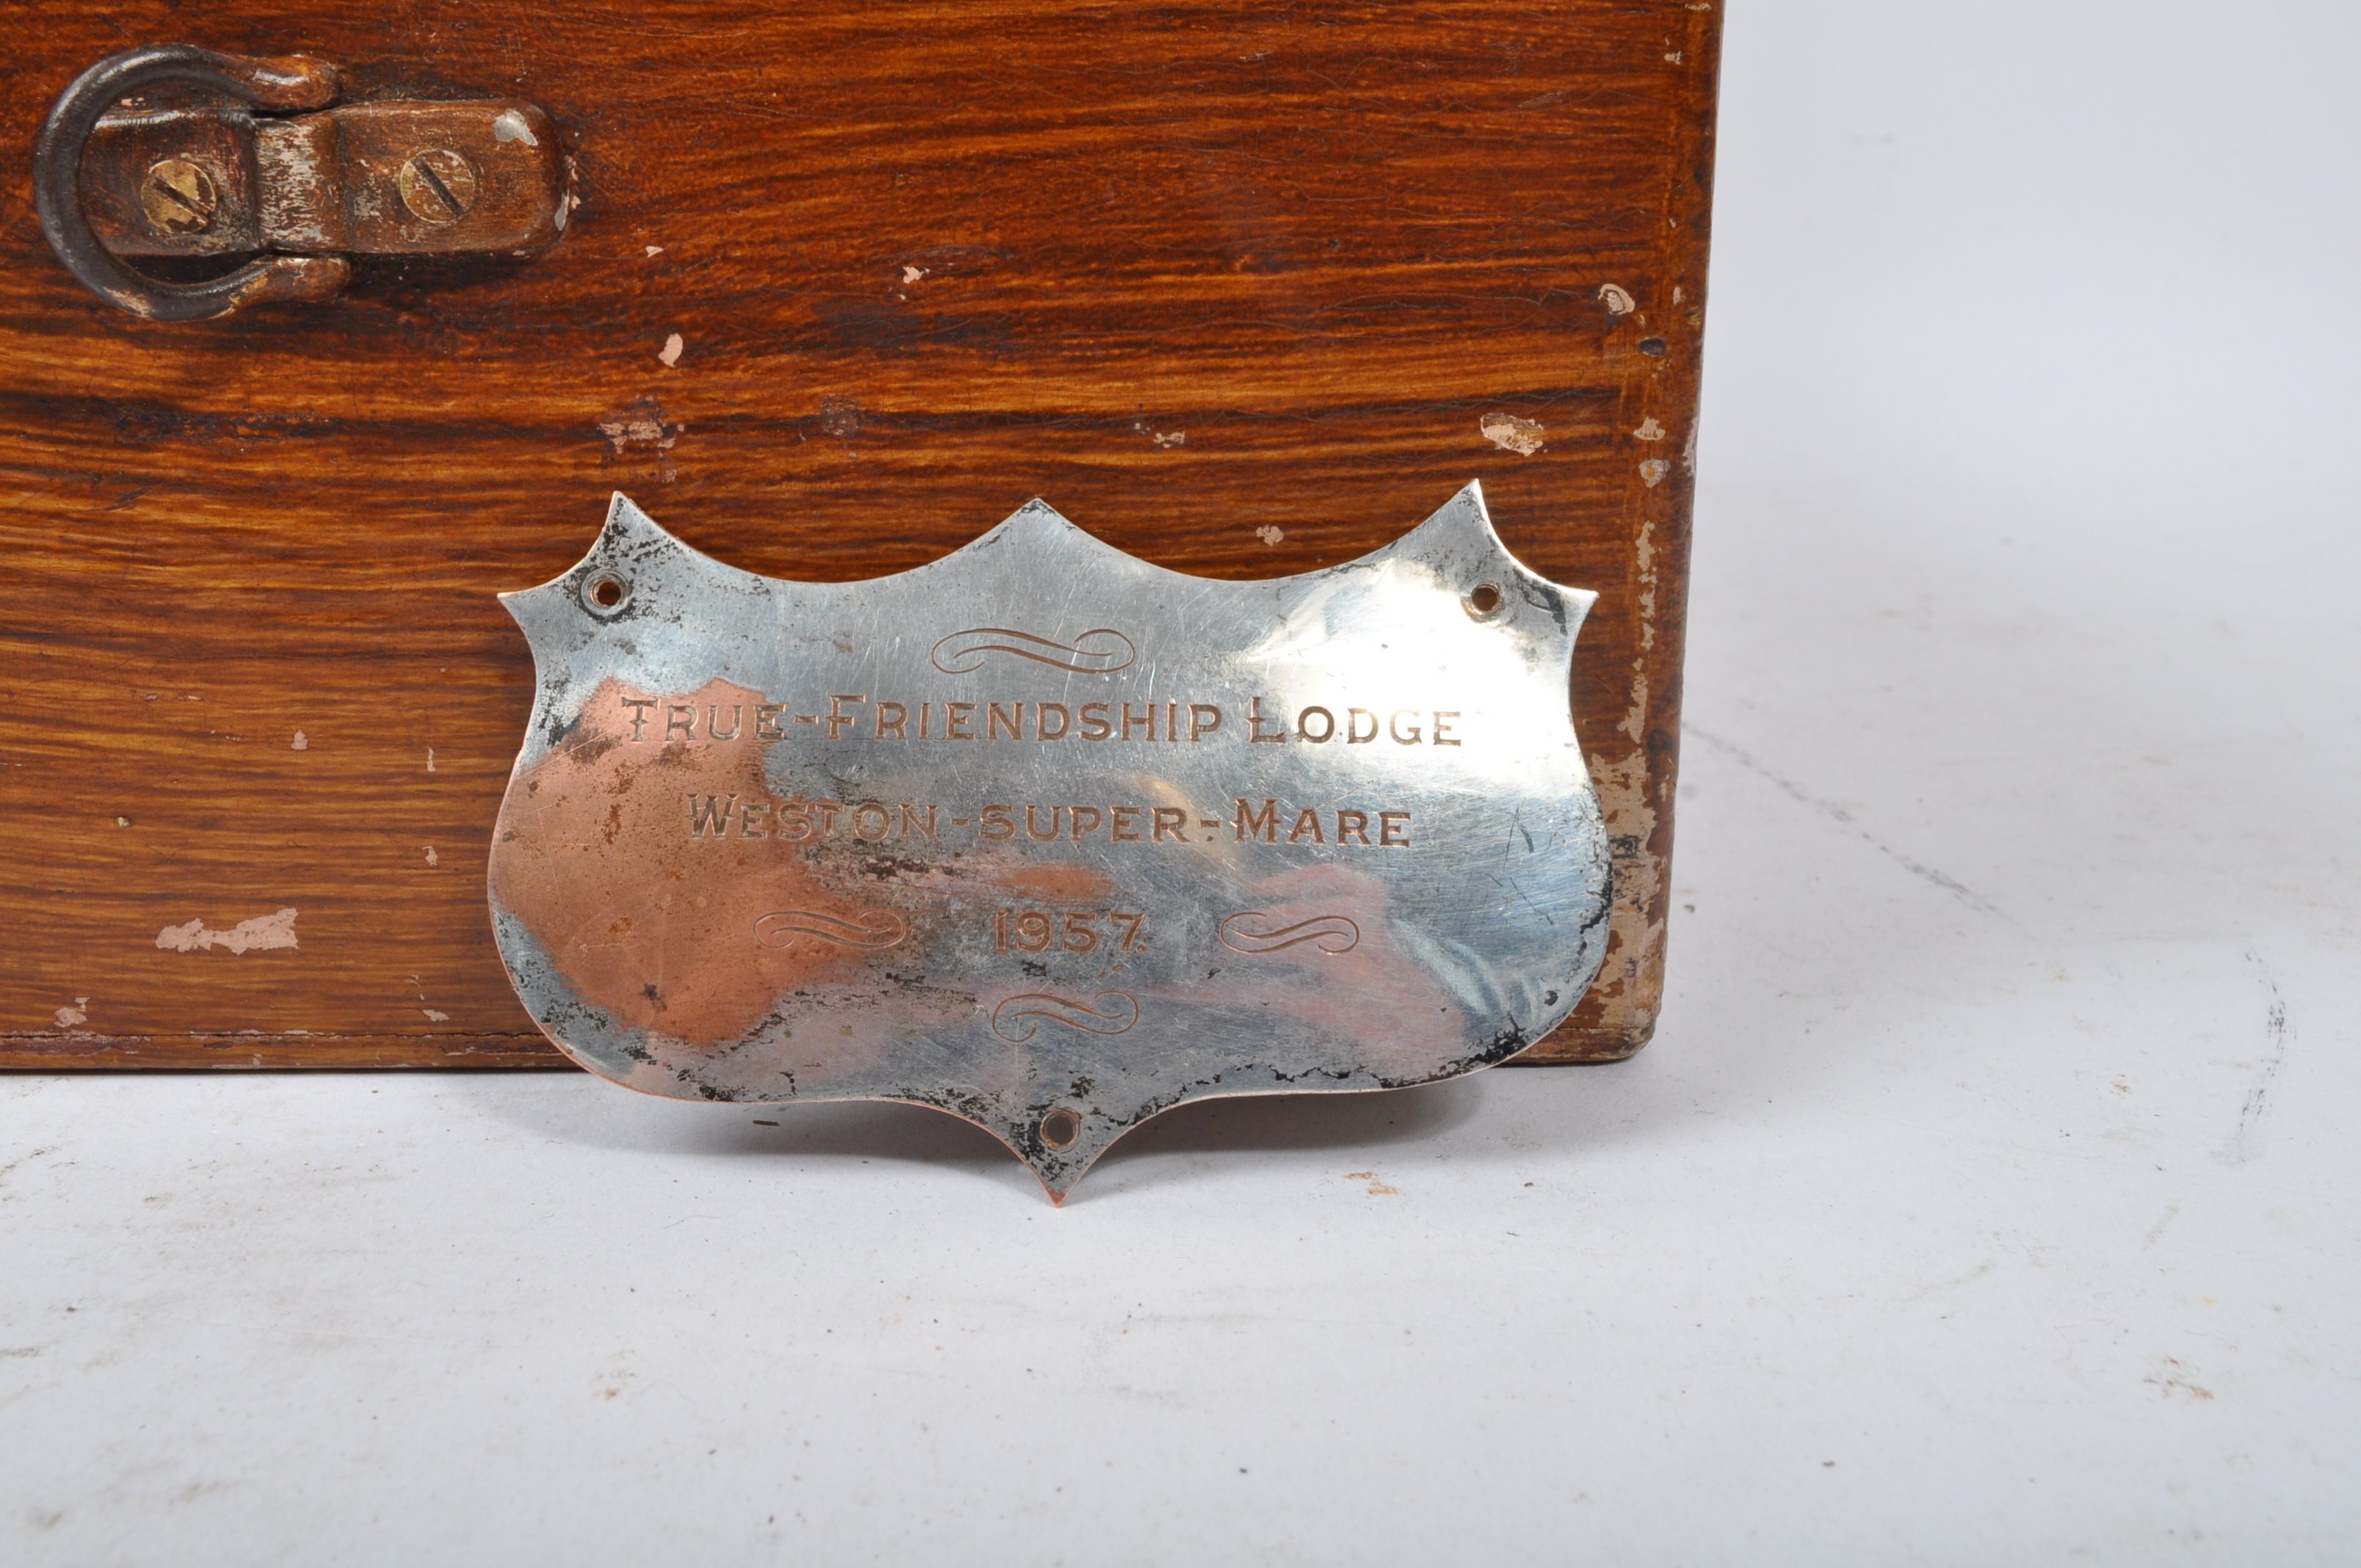 EARLY 20TH CENTURY EAST SOMERSET DISTRICT COUNCIL CHEST - Image 6 of 6